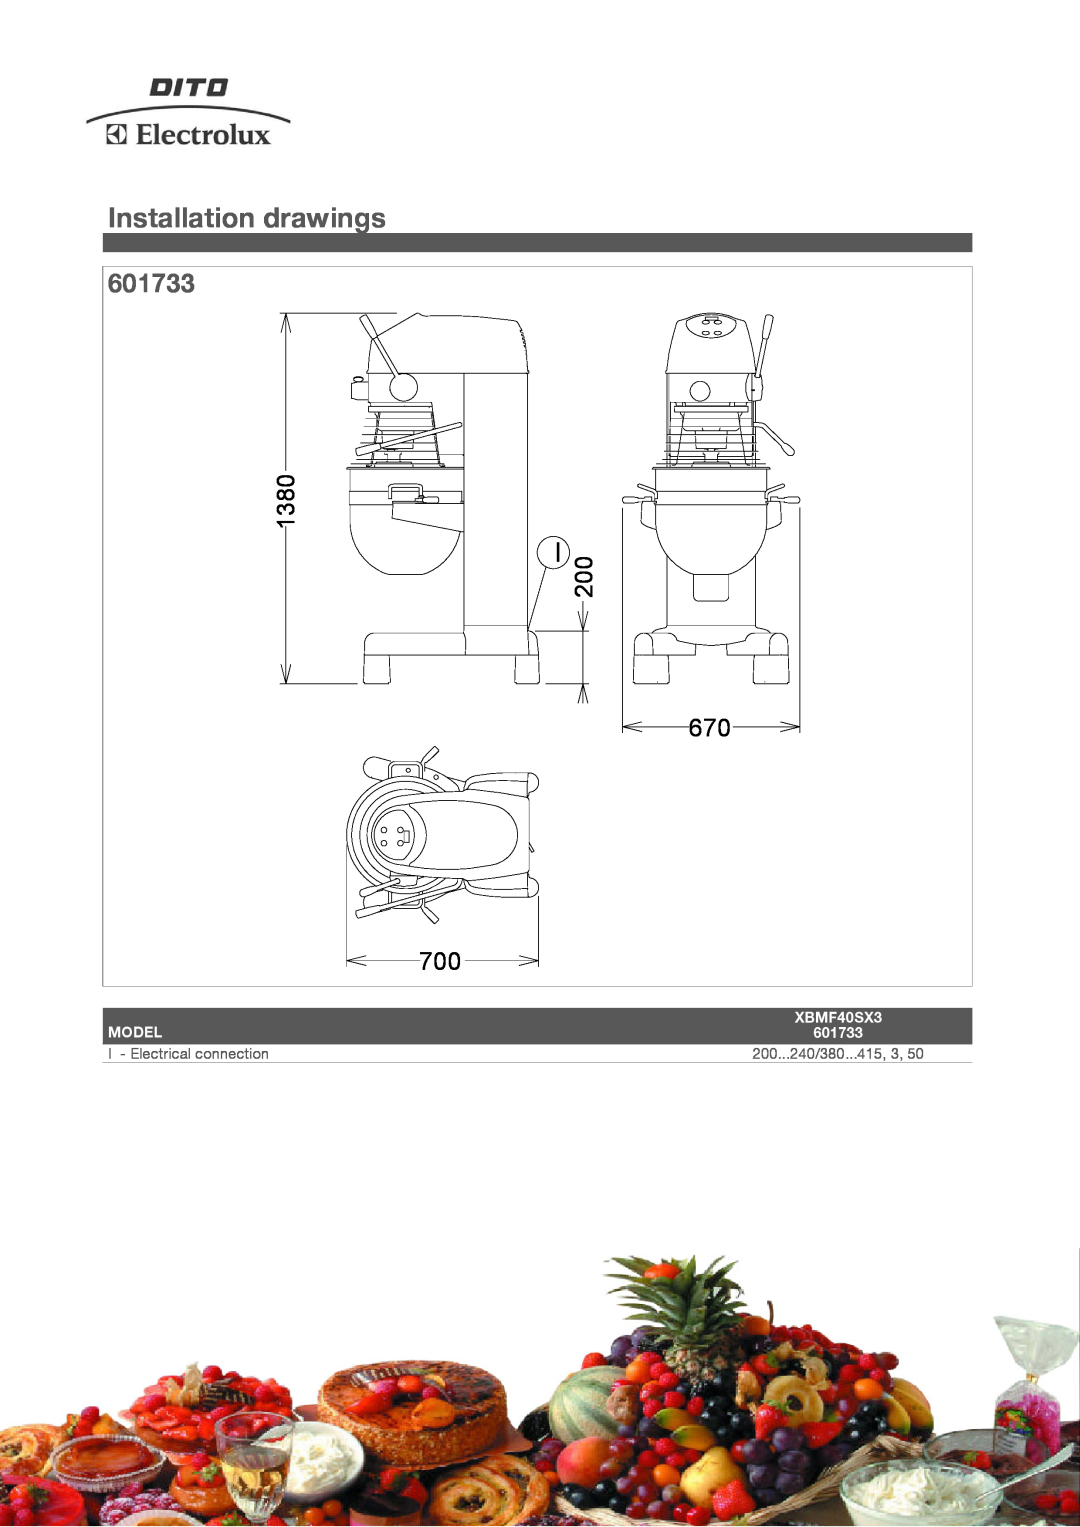 Electrolux XBMF40SX3, 601877 Installation drawings, 601733, 1380, Model, I - Electrical connection, 200...240/380...415, 3 